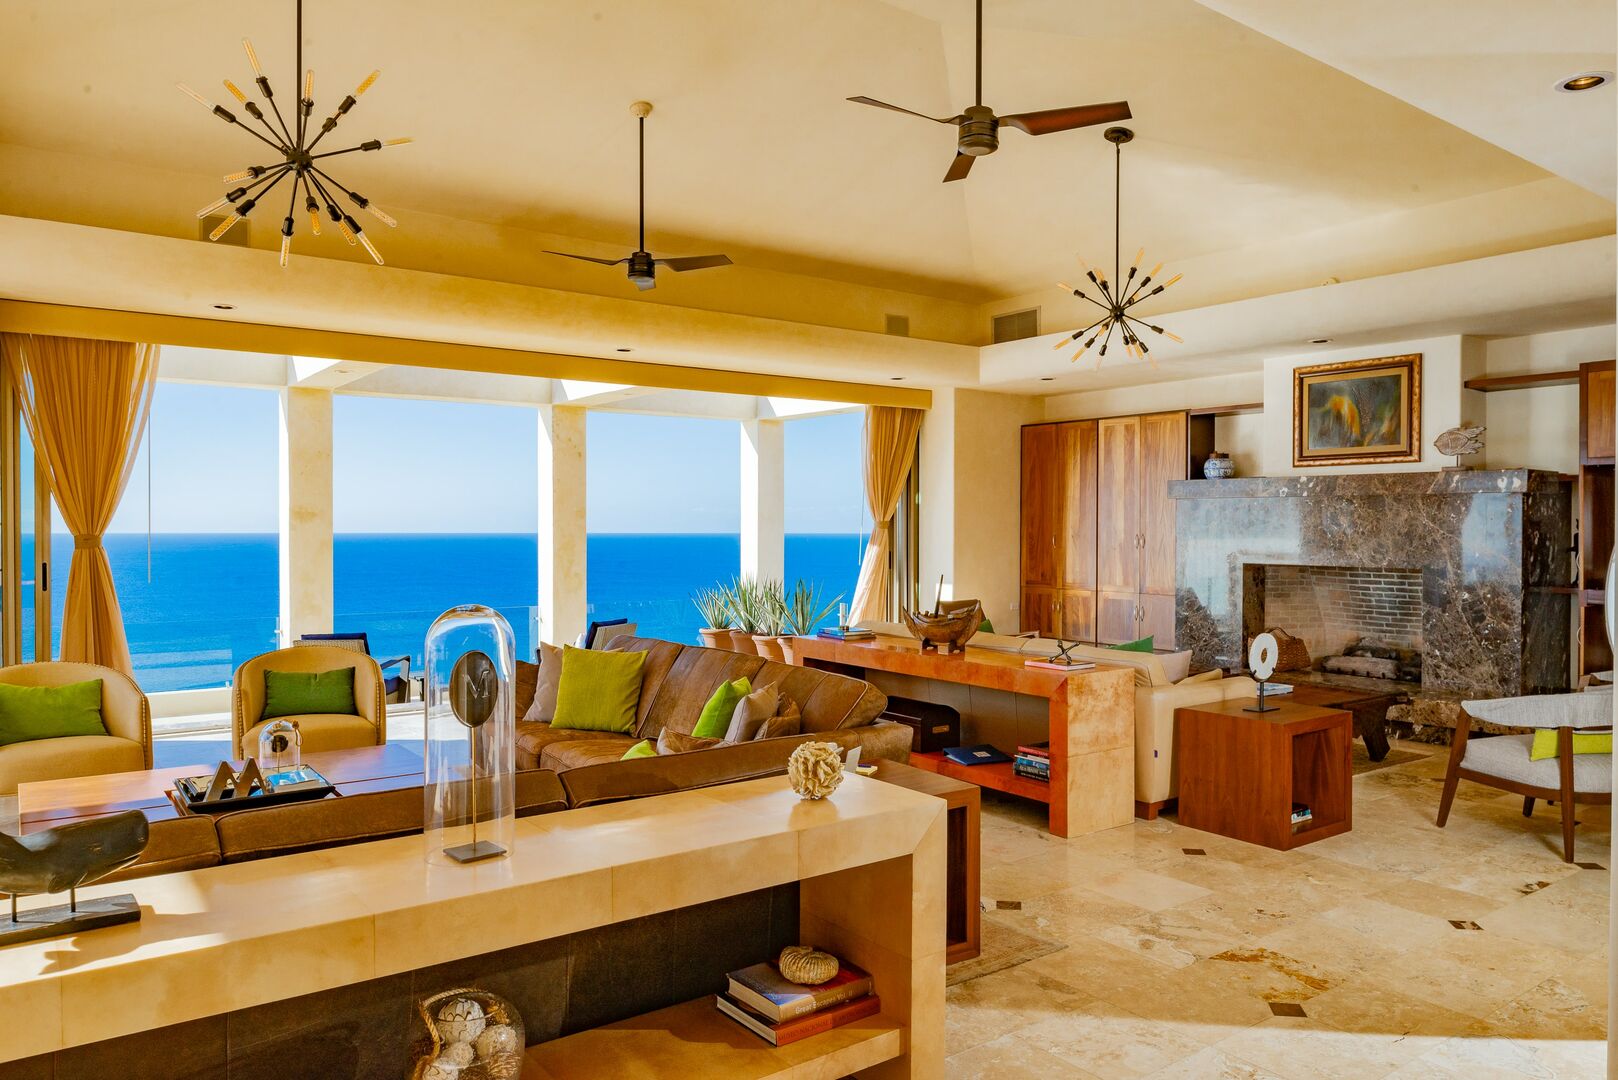 The living room and fireplace with a view of the ocean through the windows.